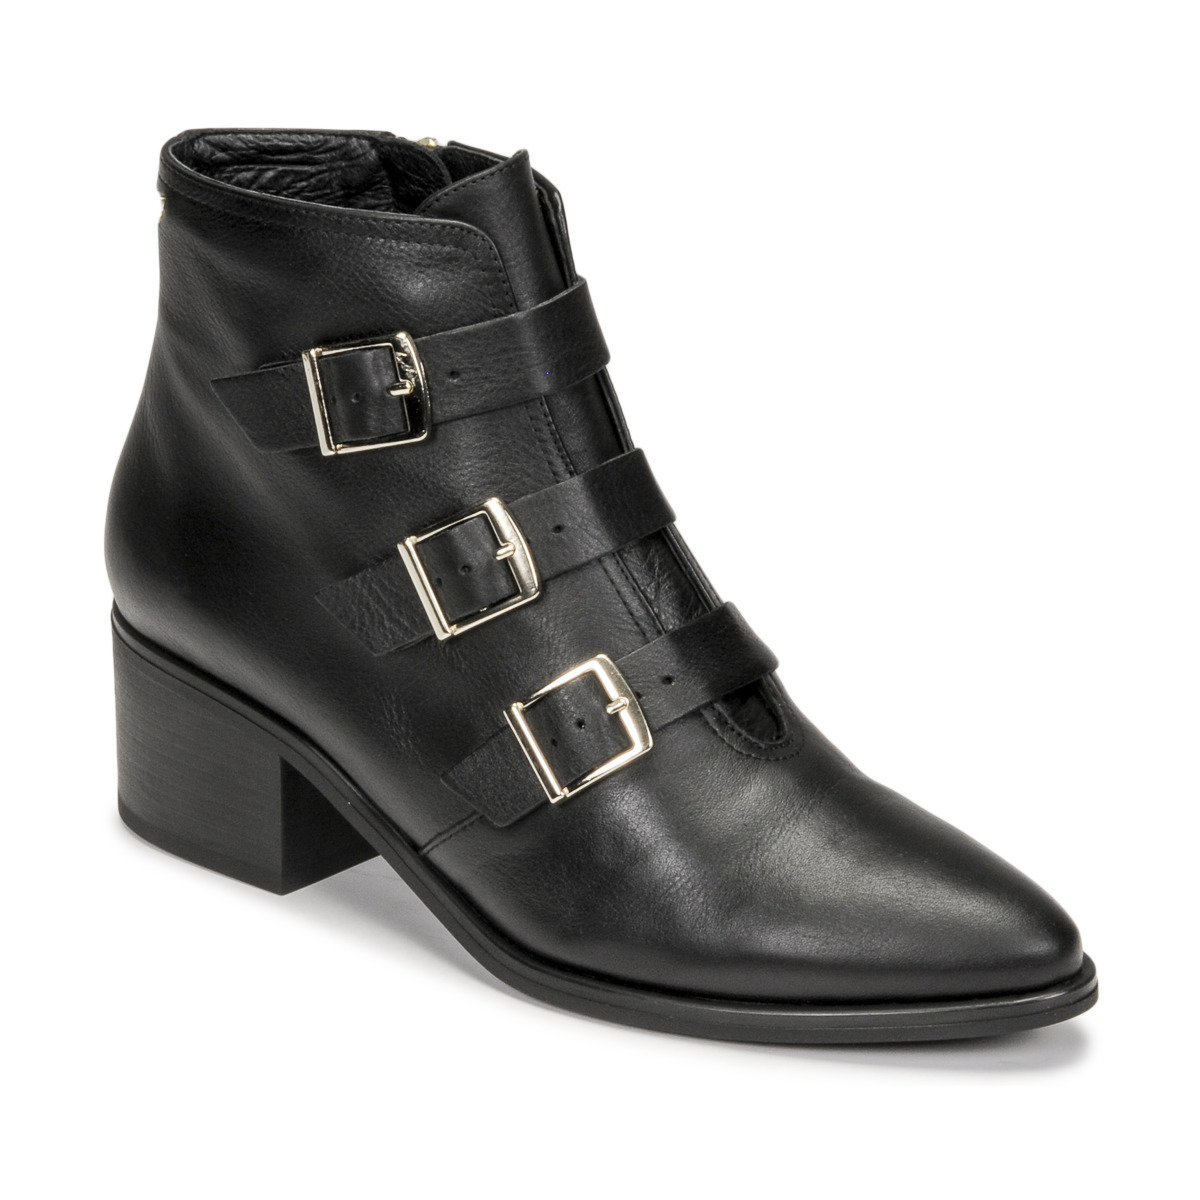 Ladies Ankle Boots in Black Spartoo Martinelli GOOFASH